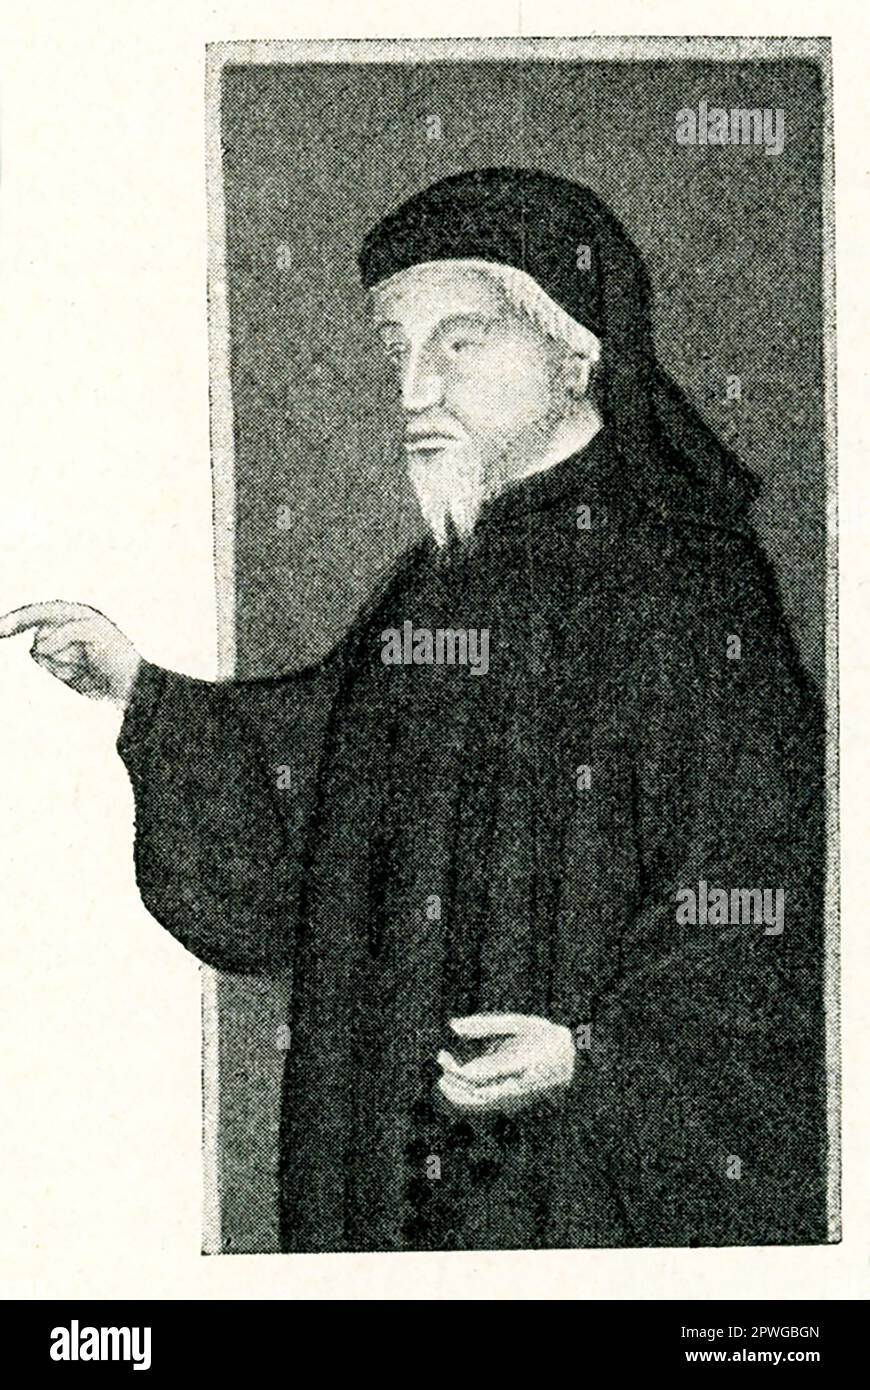 The 1906 caption reads: 'Geoffrey Chaucer. Miniature by Thomas Hoccleve's ''Regement of Princes.'' Geoffrey Chaucer, (c. 1342/43-1400), the outstanding English poet before Shakespeare and “the first finder of our language.” His The Canterbury Tales ranks as one of the greatest poetic works in English. He also contributed importantly in the second half of the 14th century to the management of public affairs as courtier, diplomat, and civil servant. Thomas Hoccleve or Occleve was an English poet and clerk, who became a key figure in 15th-century Middle English literature. His Regement of Princes Stock Photo